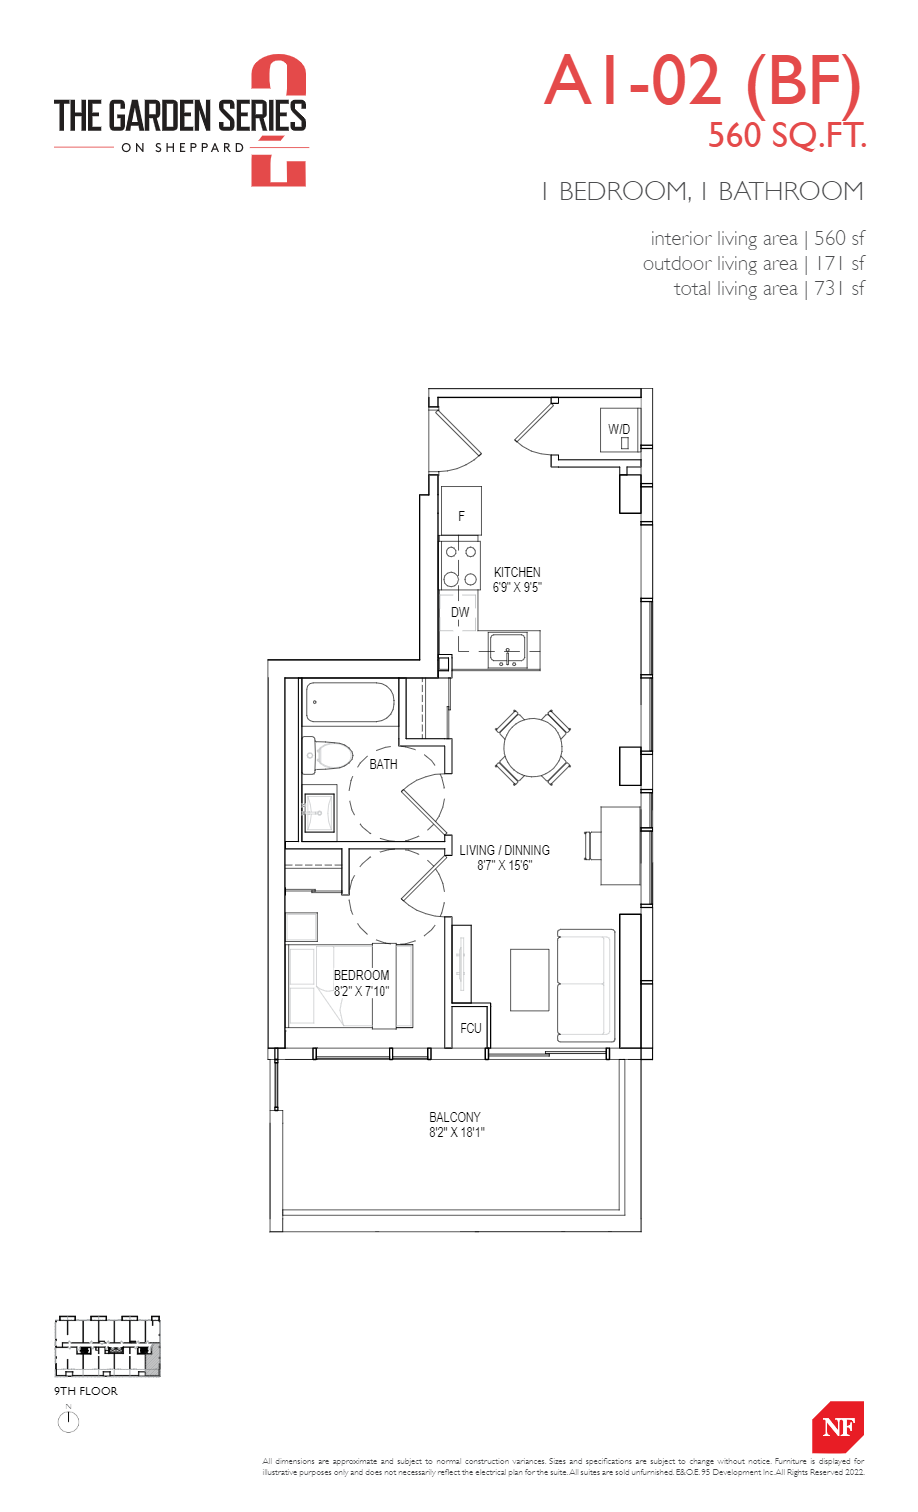  A1-02 (BF)  Floor Plan of The Garden Series 2 on Sheppard Condos with undefined beds